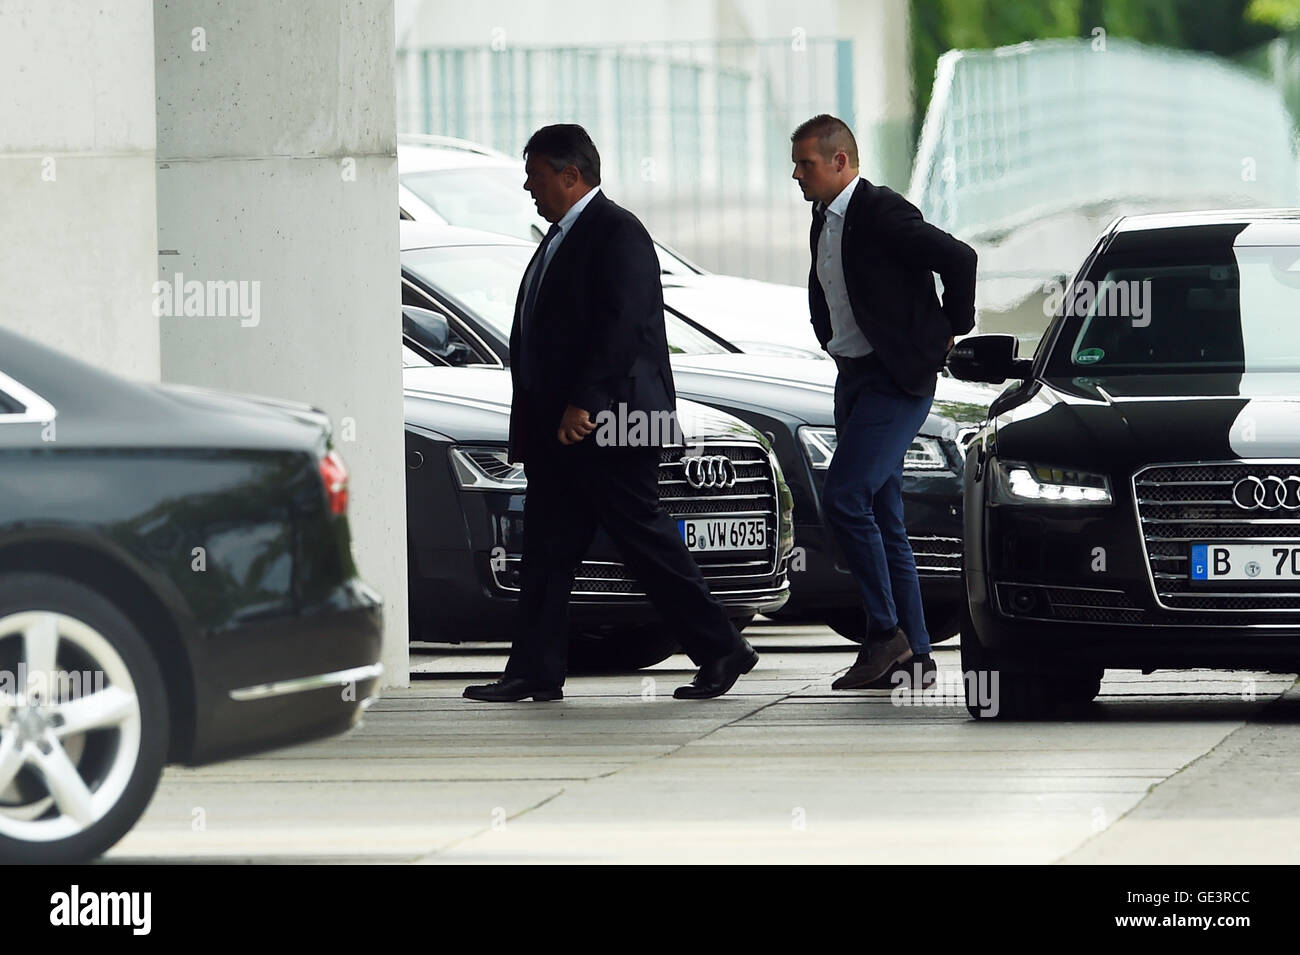 Berlin, Germany. 23rd July, 2016. Economy minister Siegmar Gabriel (SPD) arrives for emergency talks on the security situation at the federal chancellery in Berlin, Germany, 23 July 2016. After an attack in Munich interior minister de Maizière (CDU) has ordered flags at half-mast throughout Germany. An 18-year-old German-Iranian had killed nine people and himself in Munich on Friday evening. The background and motive of the attack remain unclear. PHOTO: Maurizio Gambarini/dpa/Alamy Live News Stock Photo